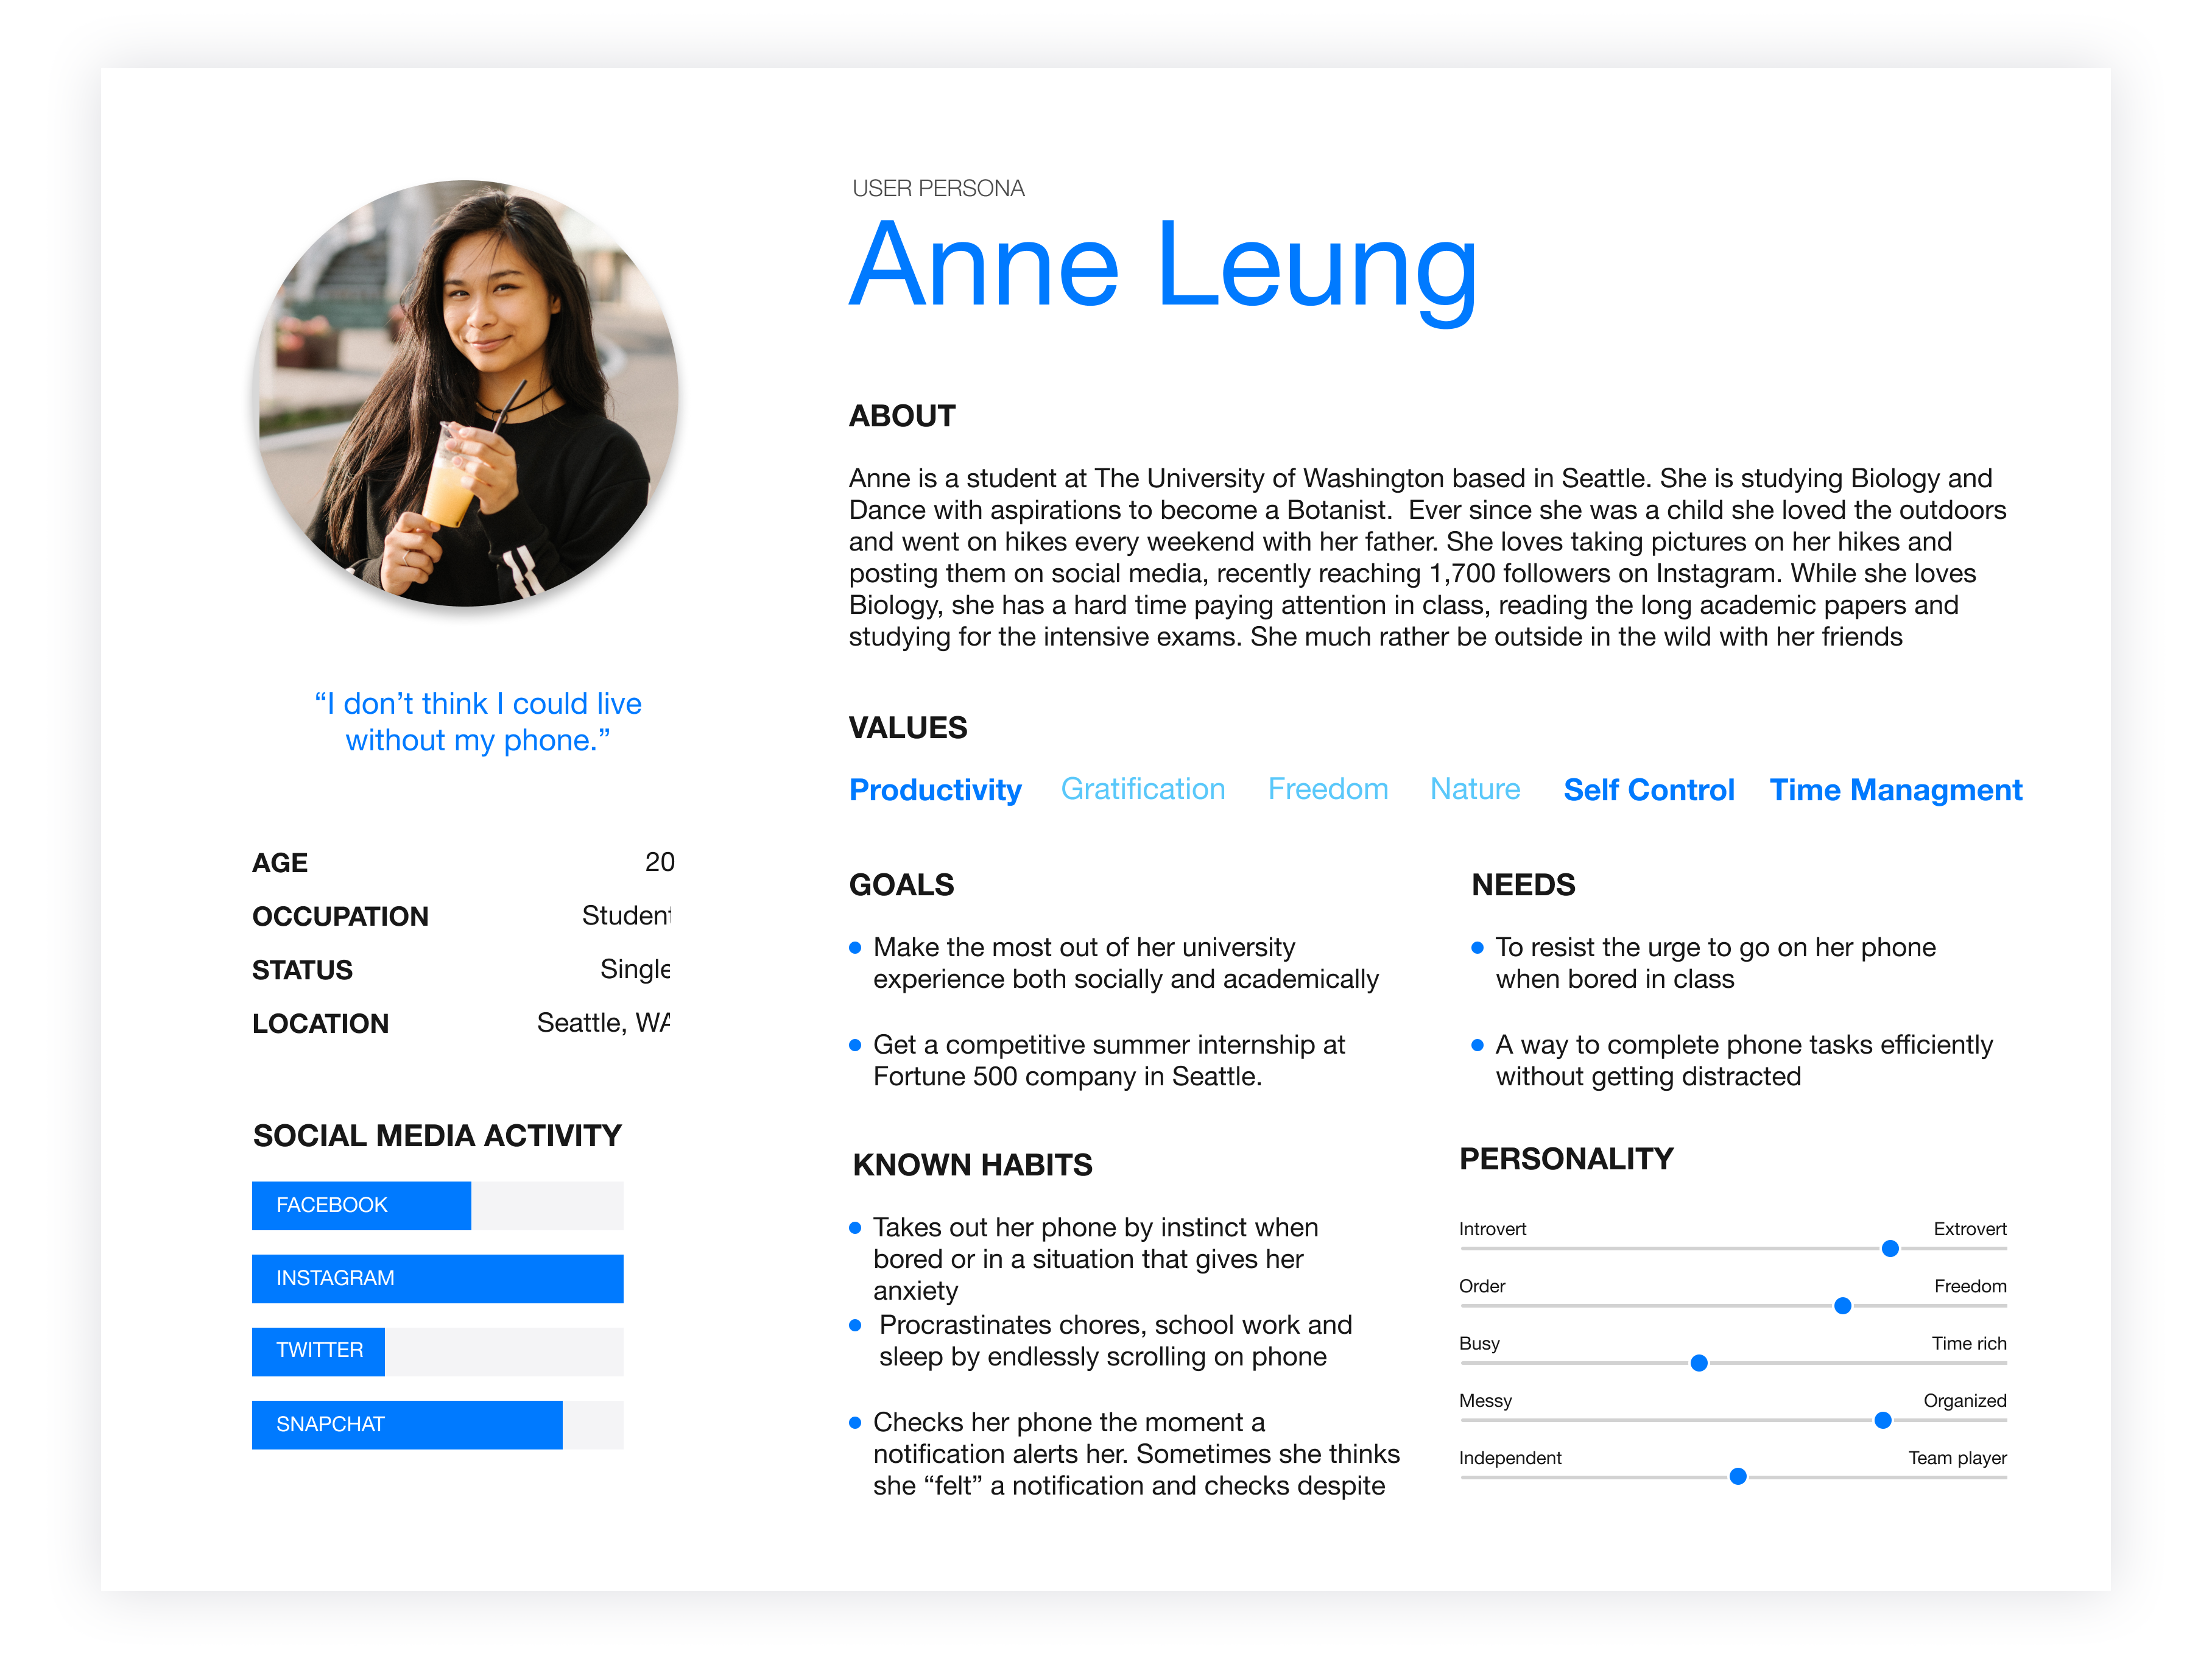 Persona for our user Anne